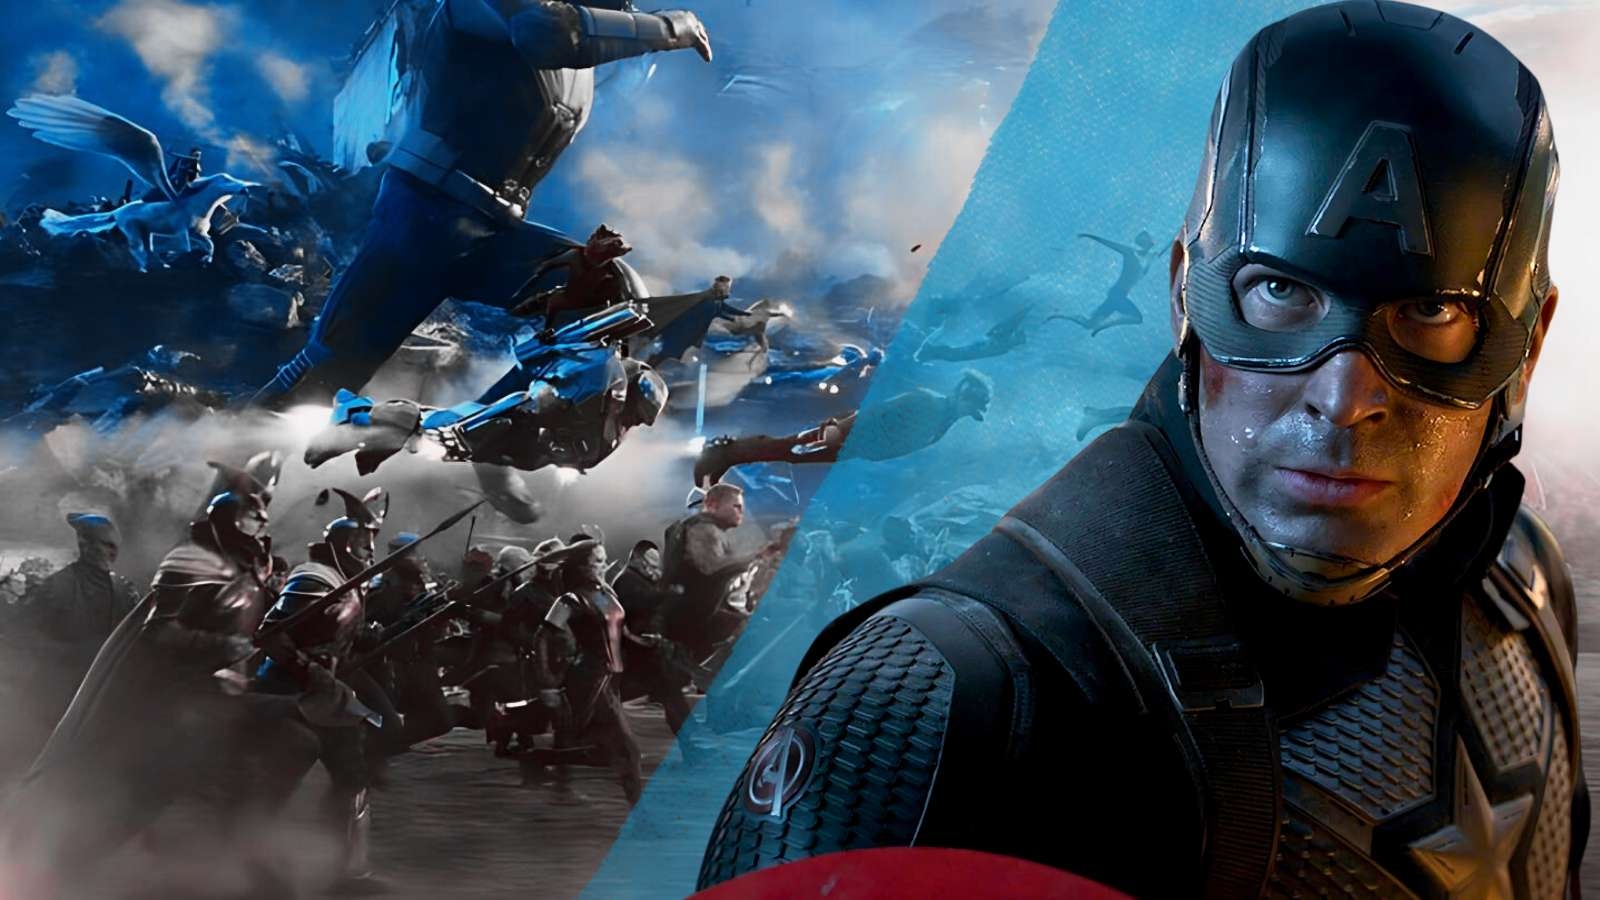 One Mind-blowing Detail About Captain America in Avengers: Endgame That Most Fans Missed Proves Why It’s the Greatest Superhero Movie Ever Made